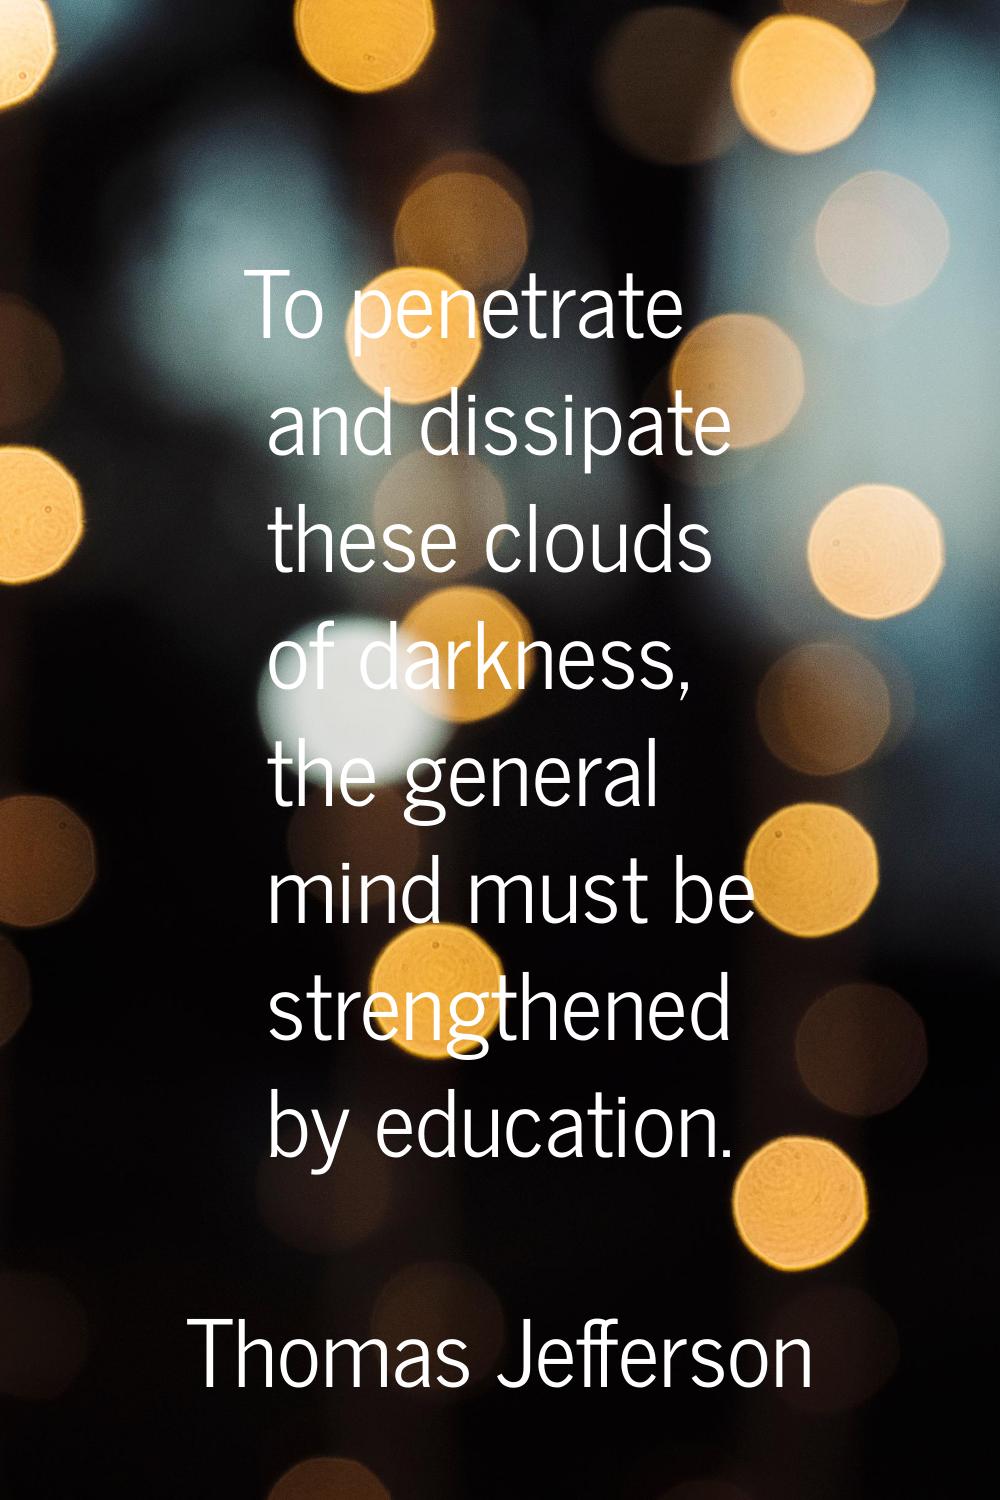 To penetrate and dissipate these clouds of darkness, the general mind must be strengthened by educa